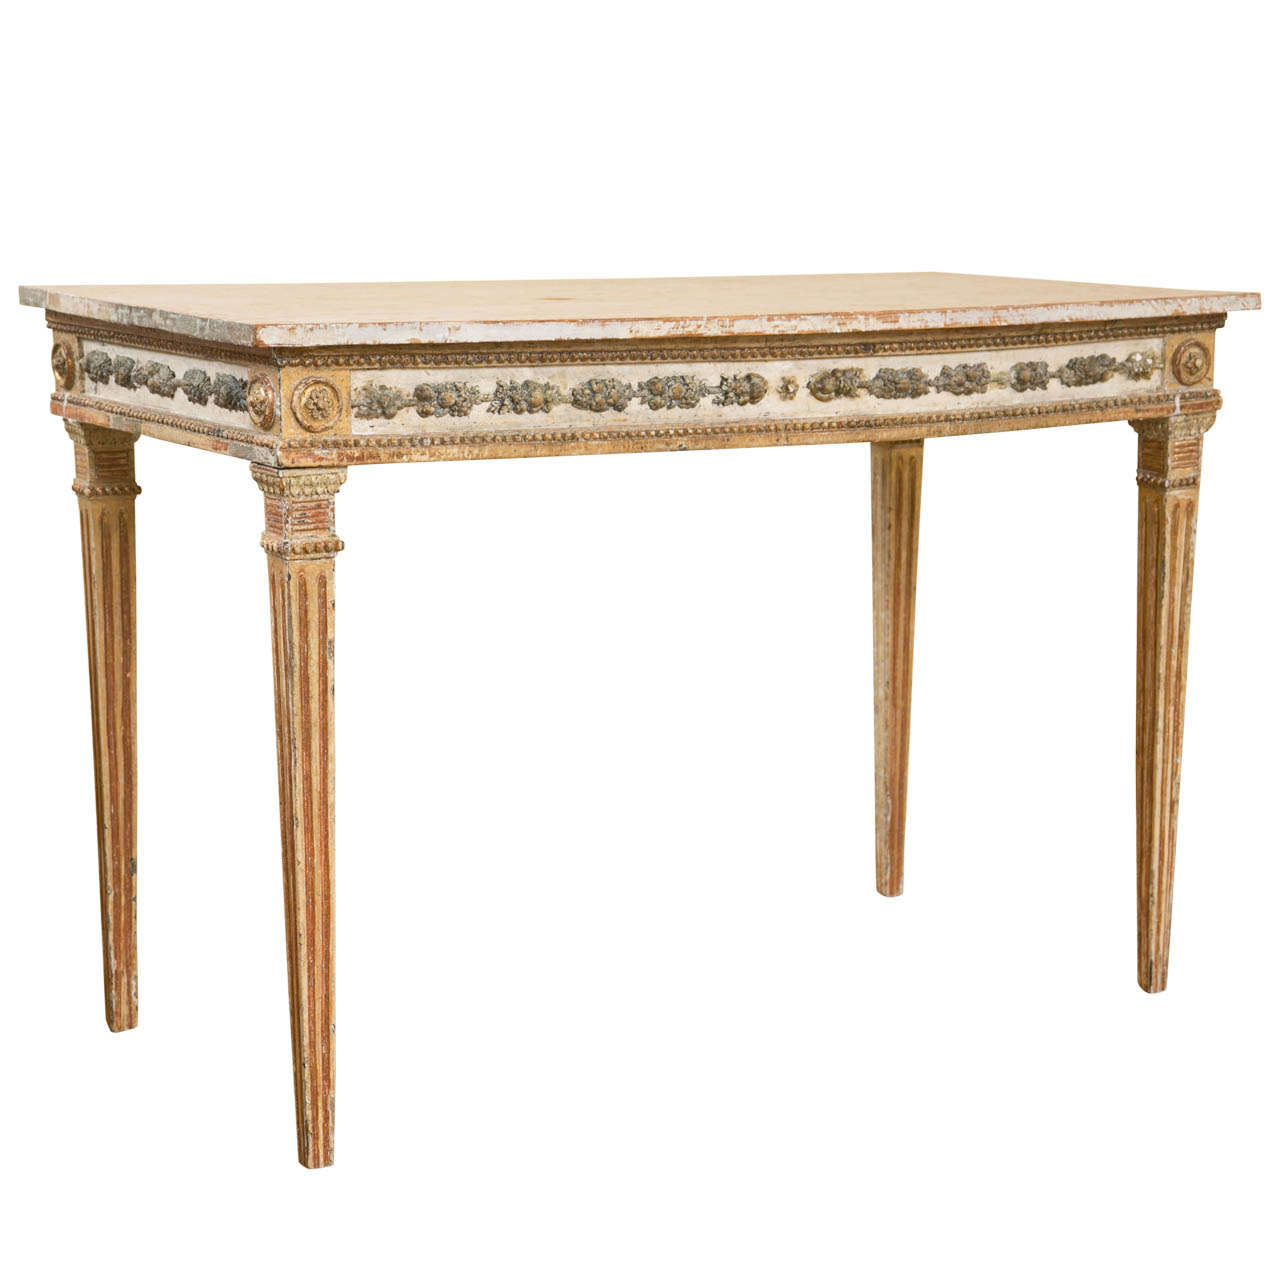 Regency Painted Wood Console Table, 18th to 19th Century For Sale